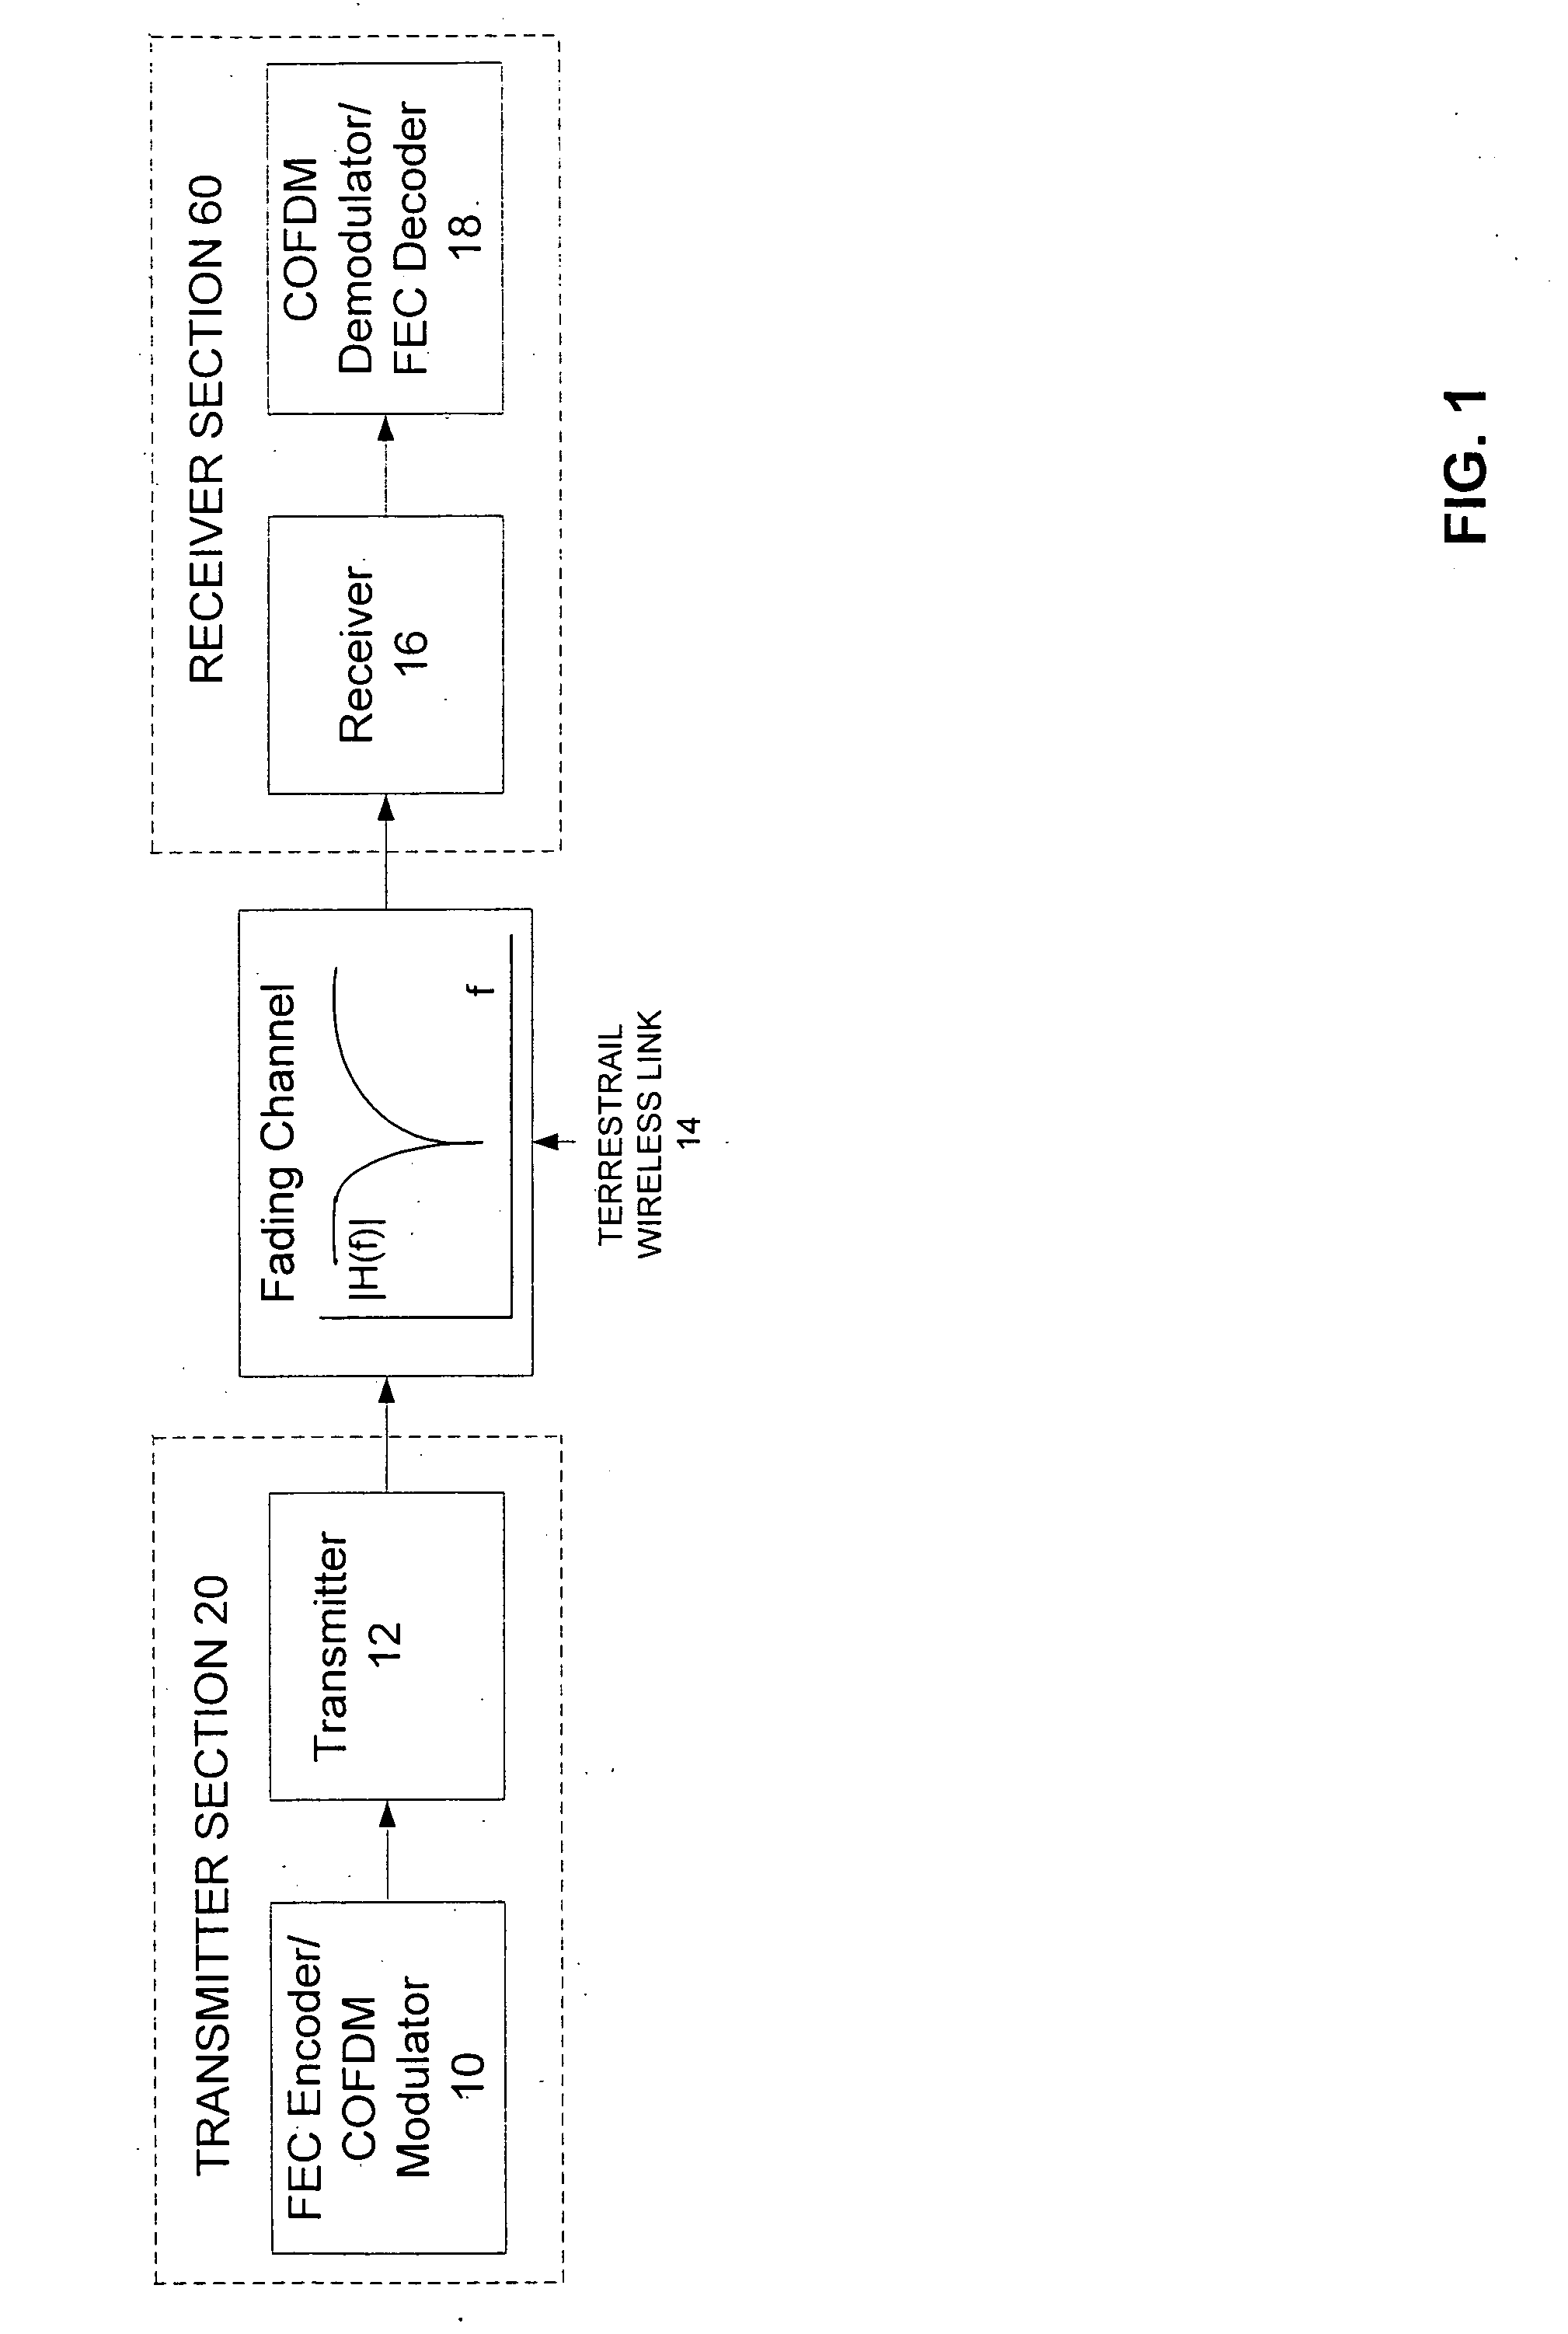 Methods, apparatus and systems for terrestrial wireless broadcast of digital data to stationary receivers